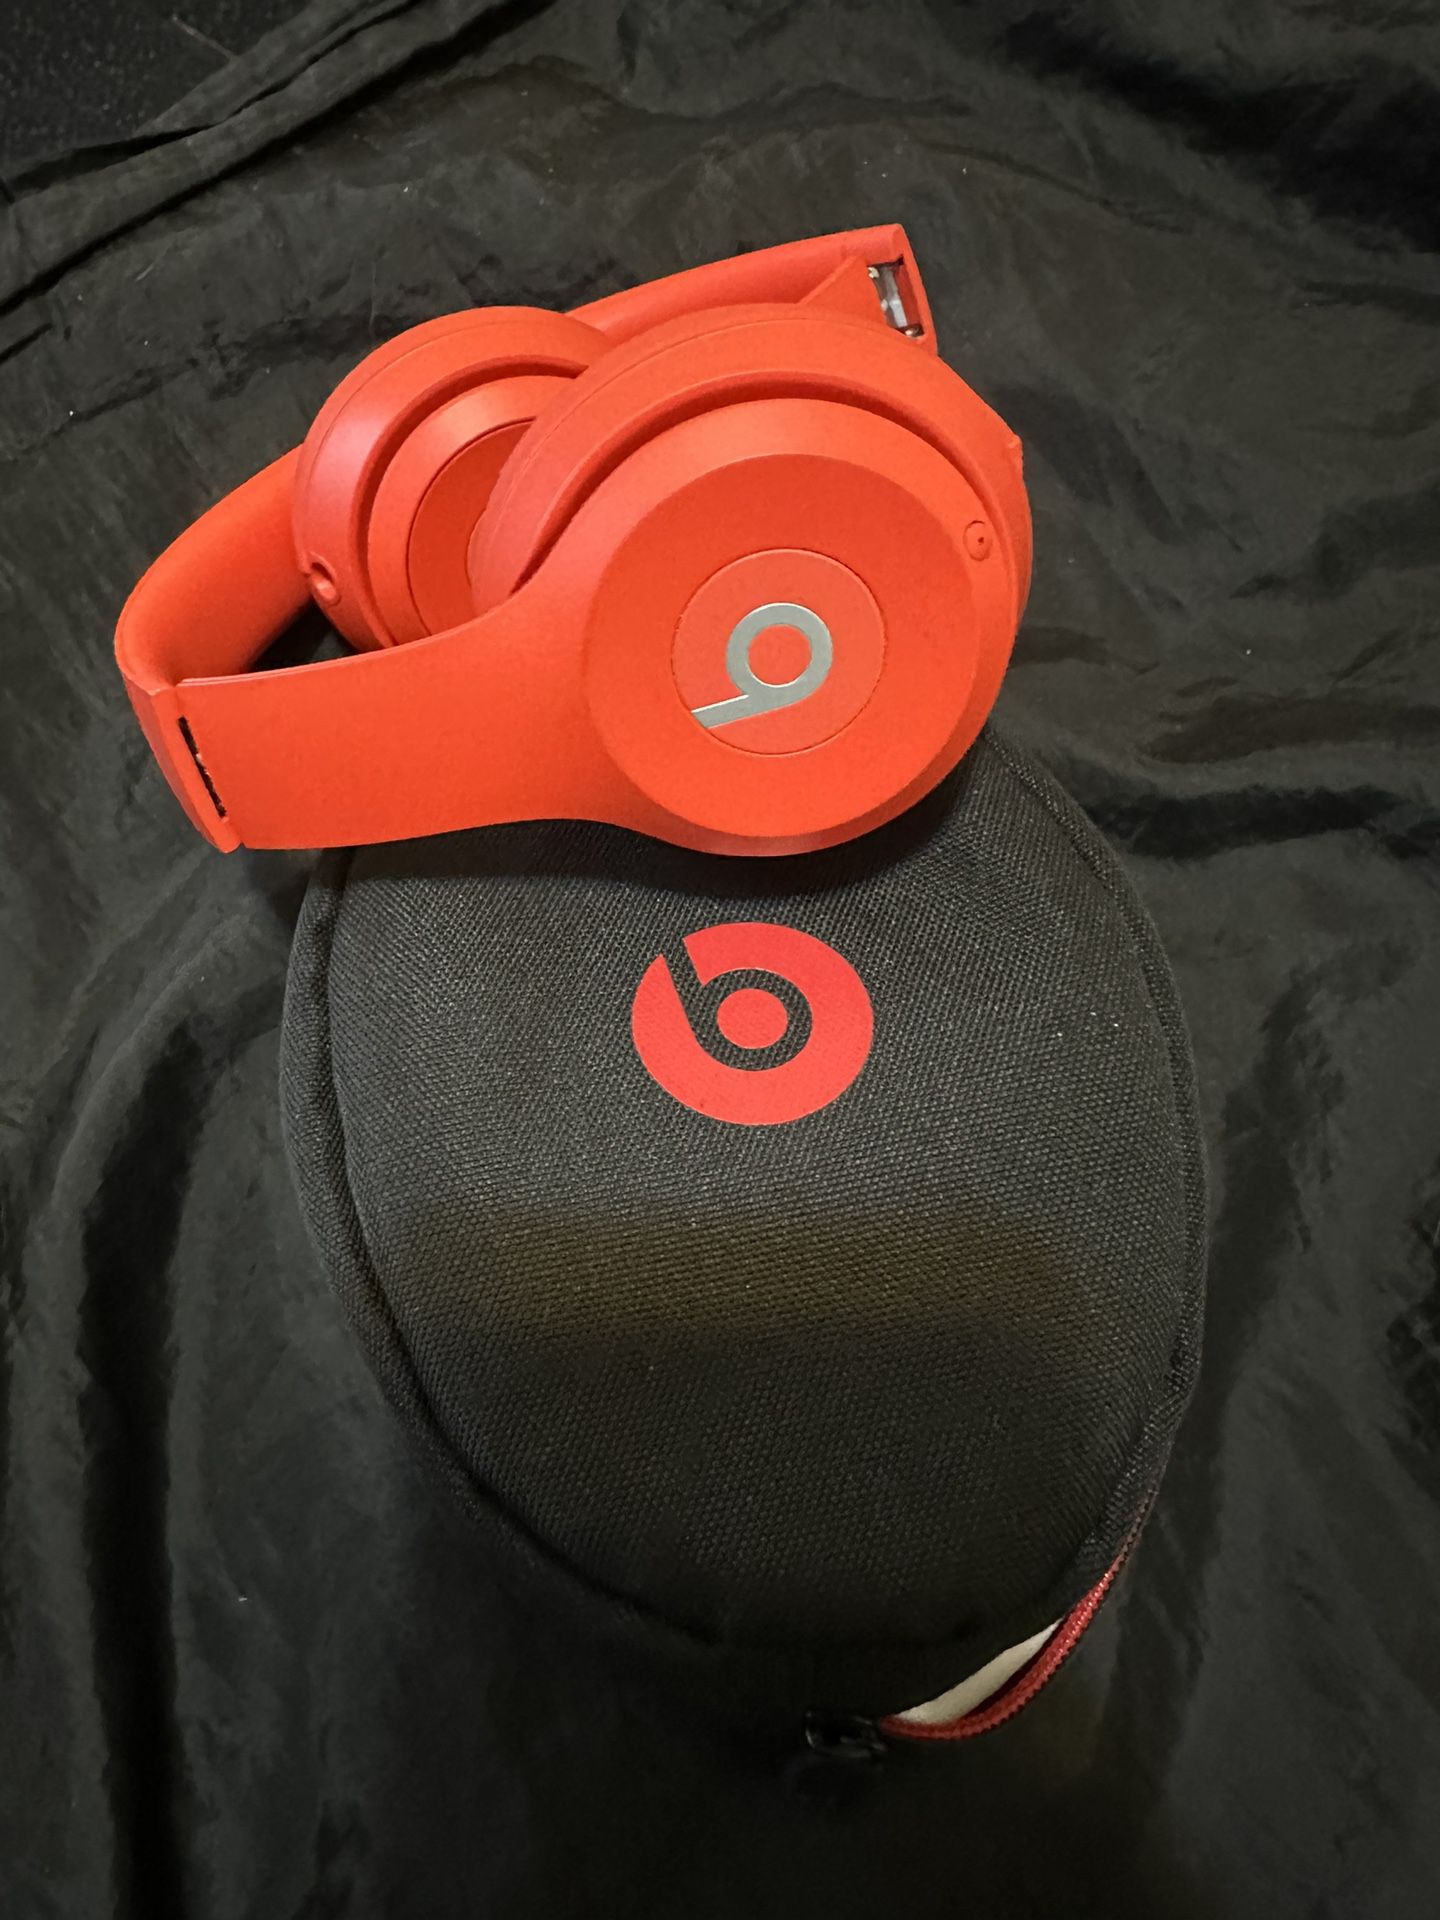 Red Beats Solo 3